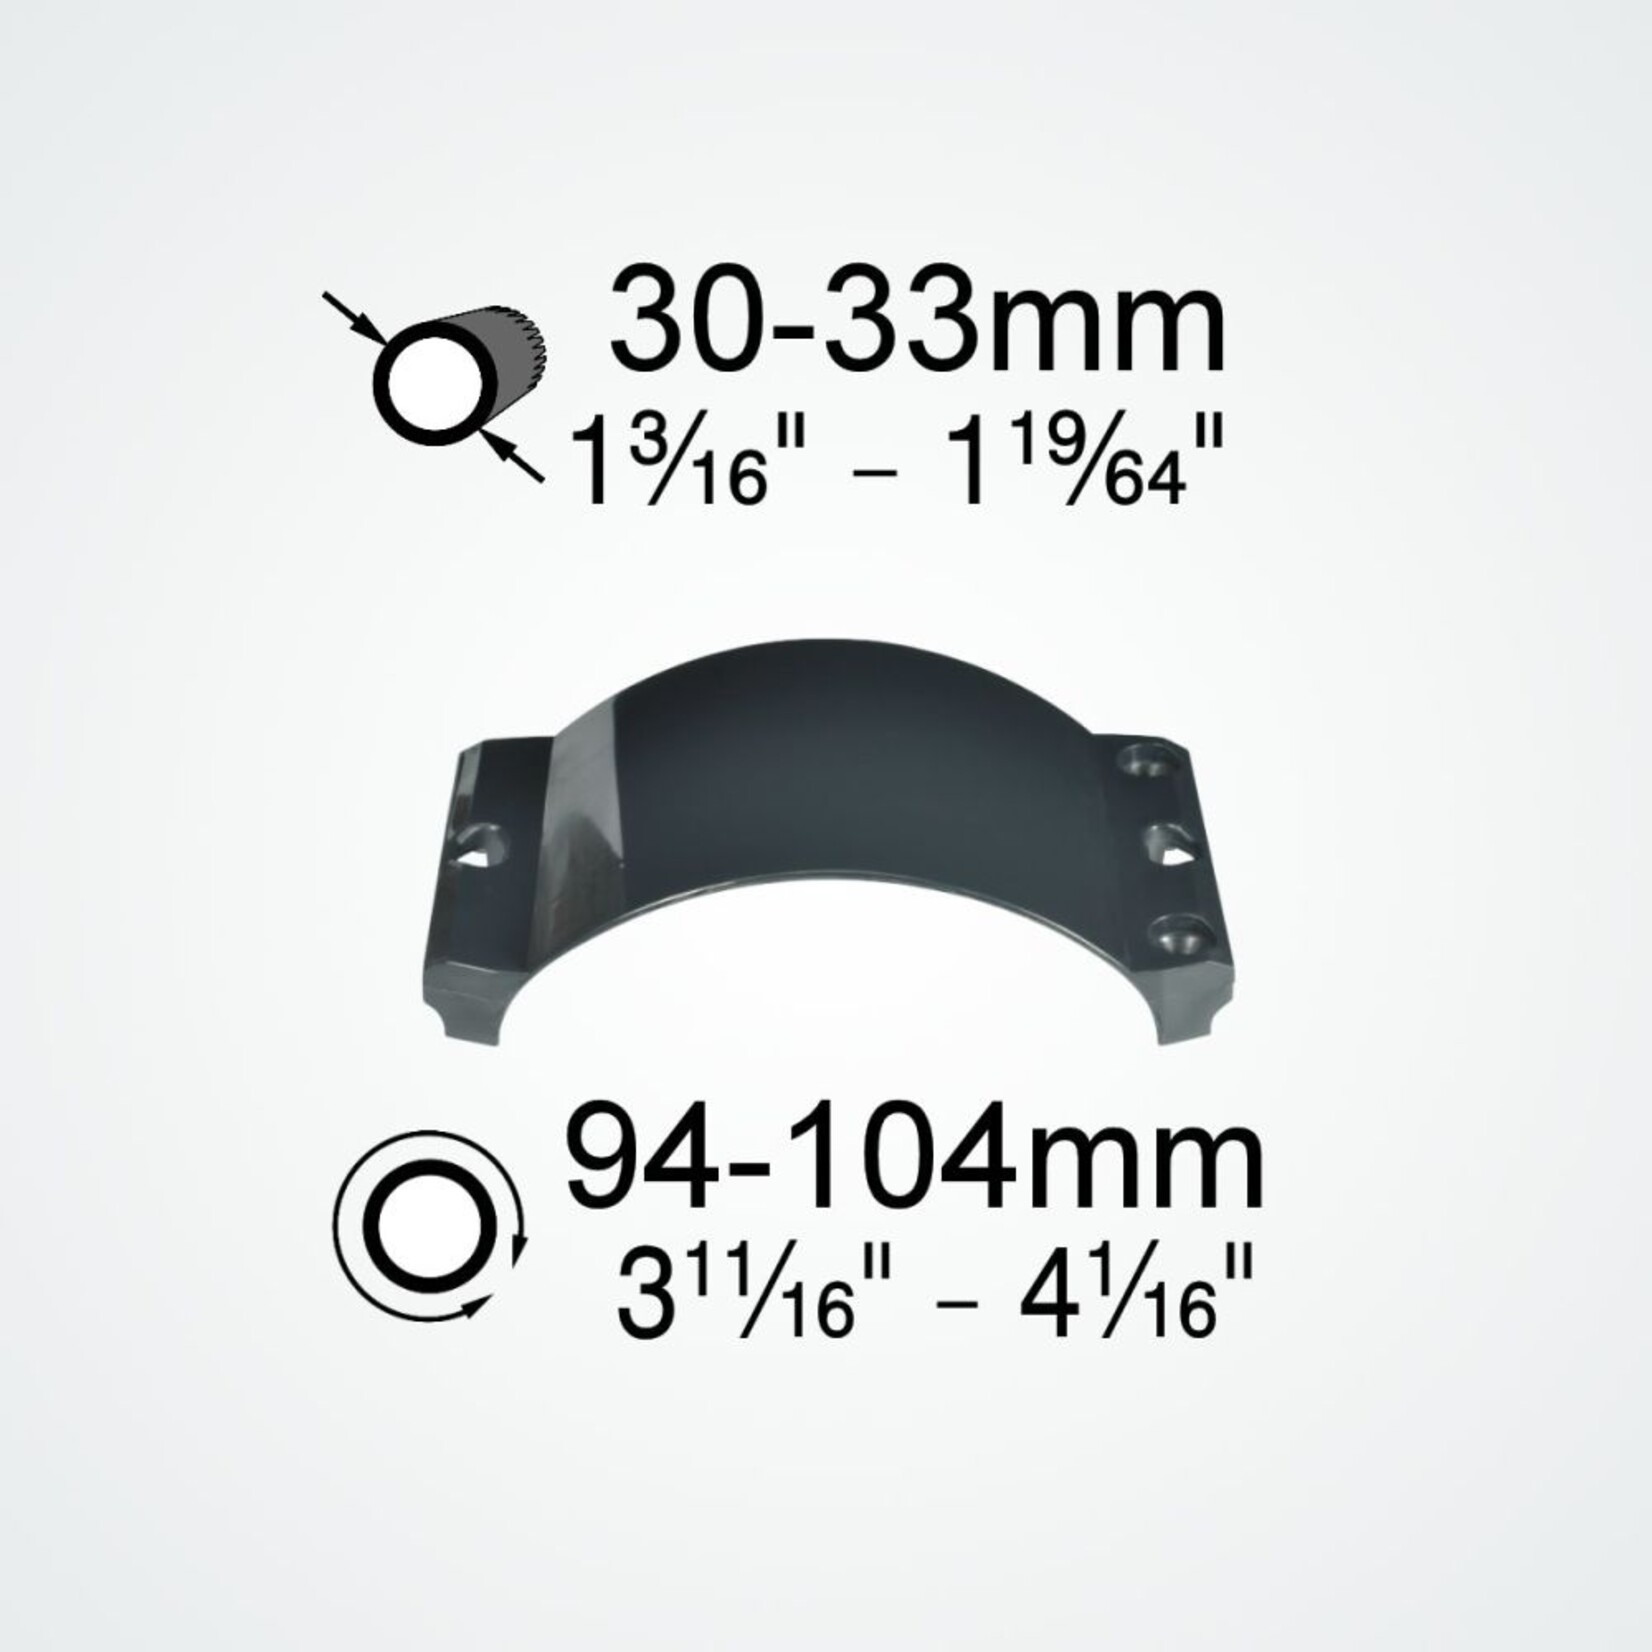 Clamcleat Clamp for 103-105mm circumference grafietgrijs - Loose